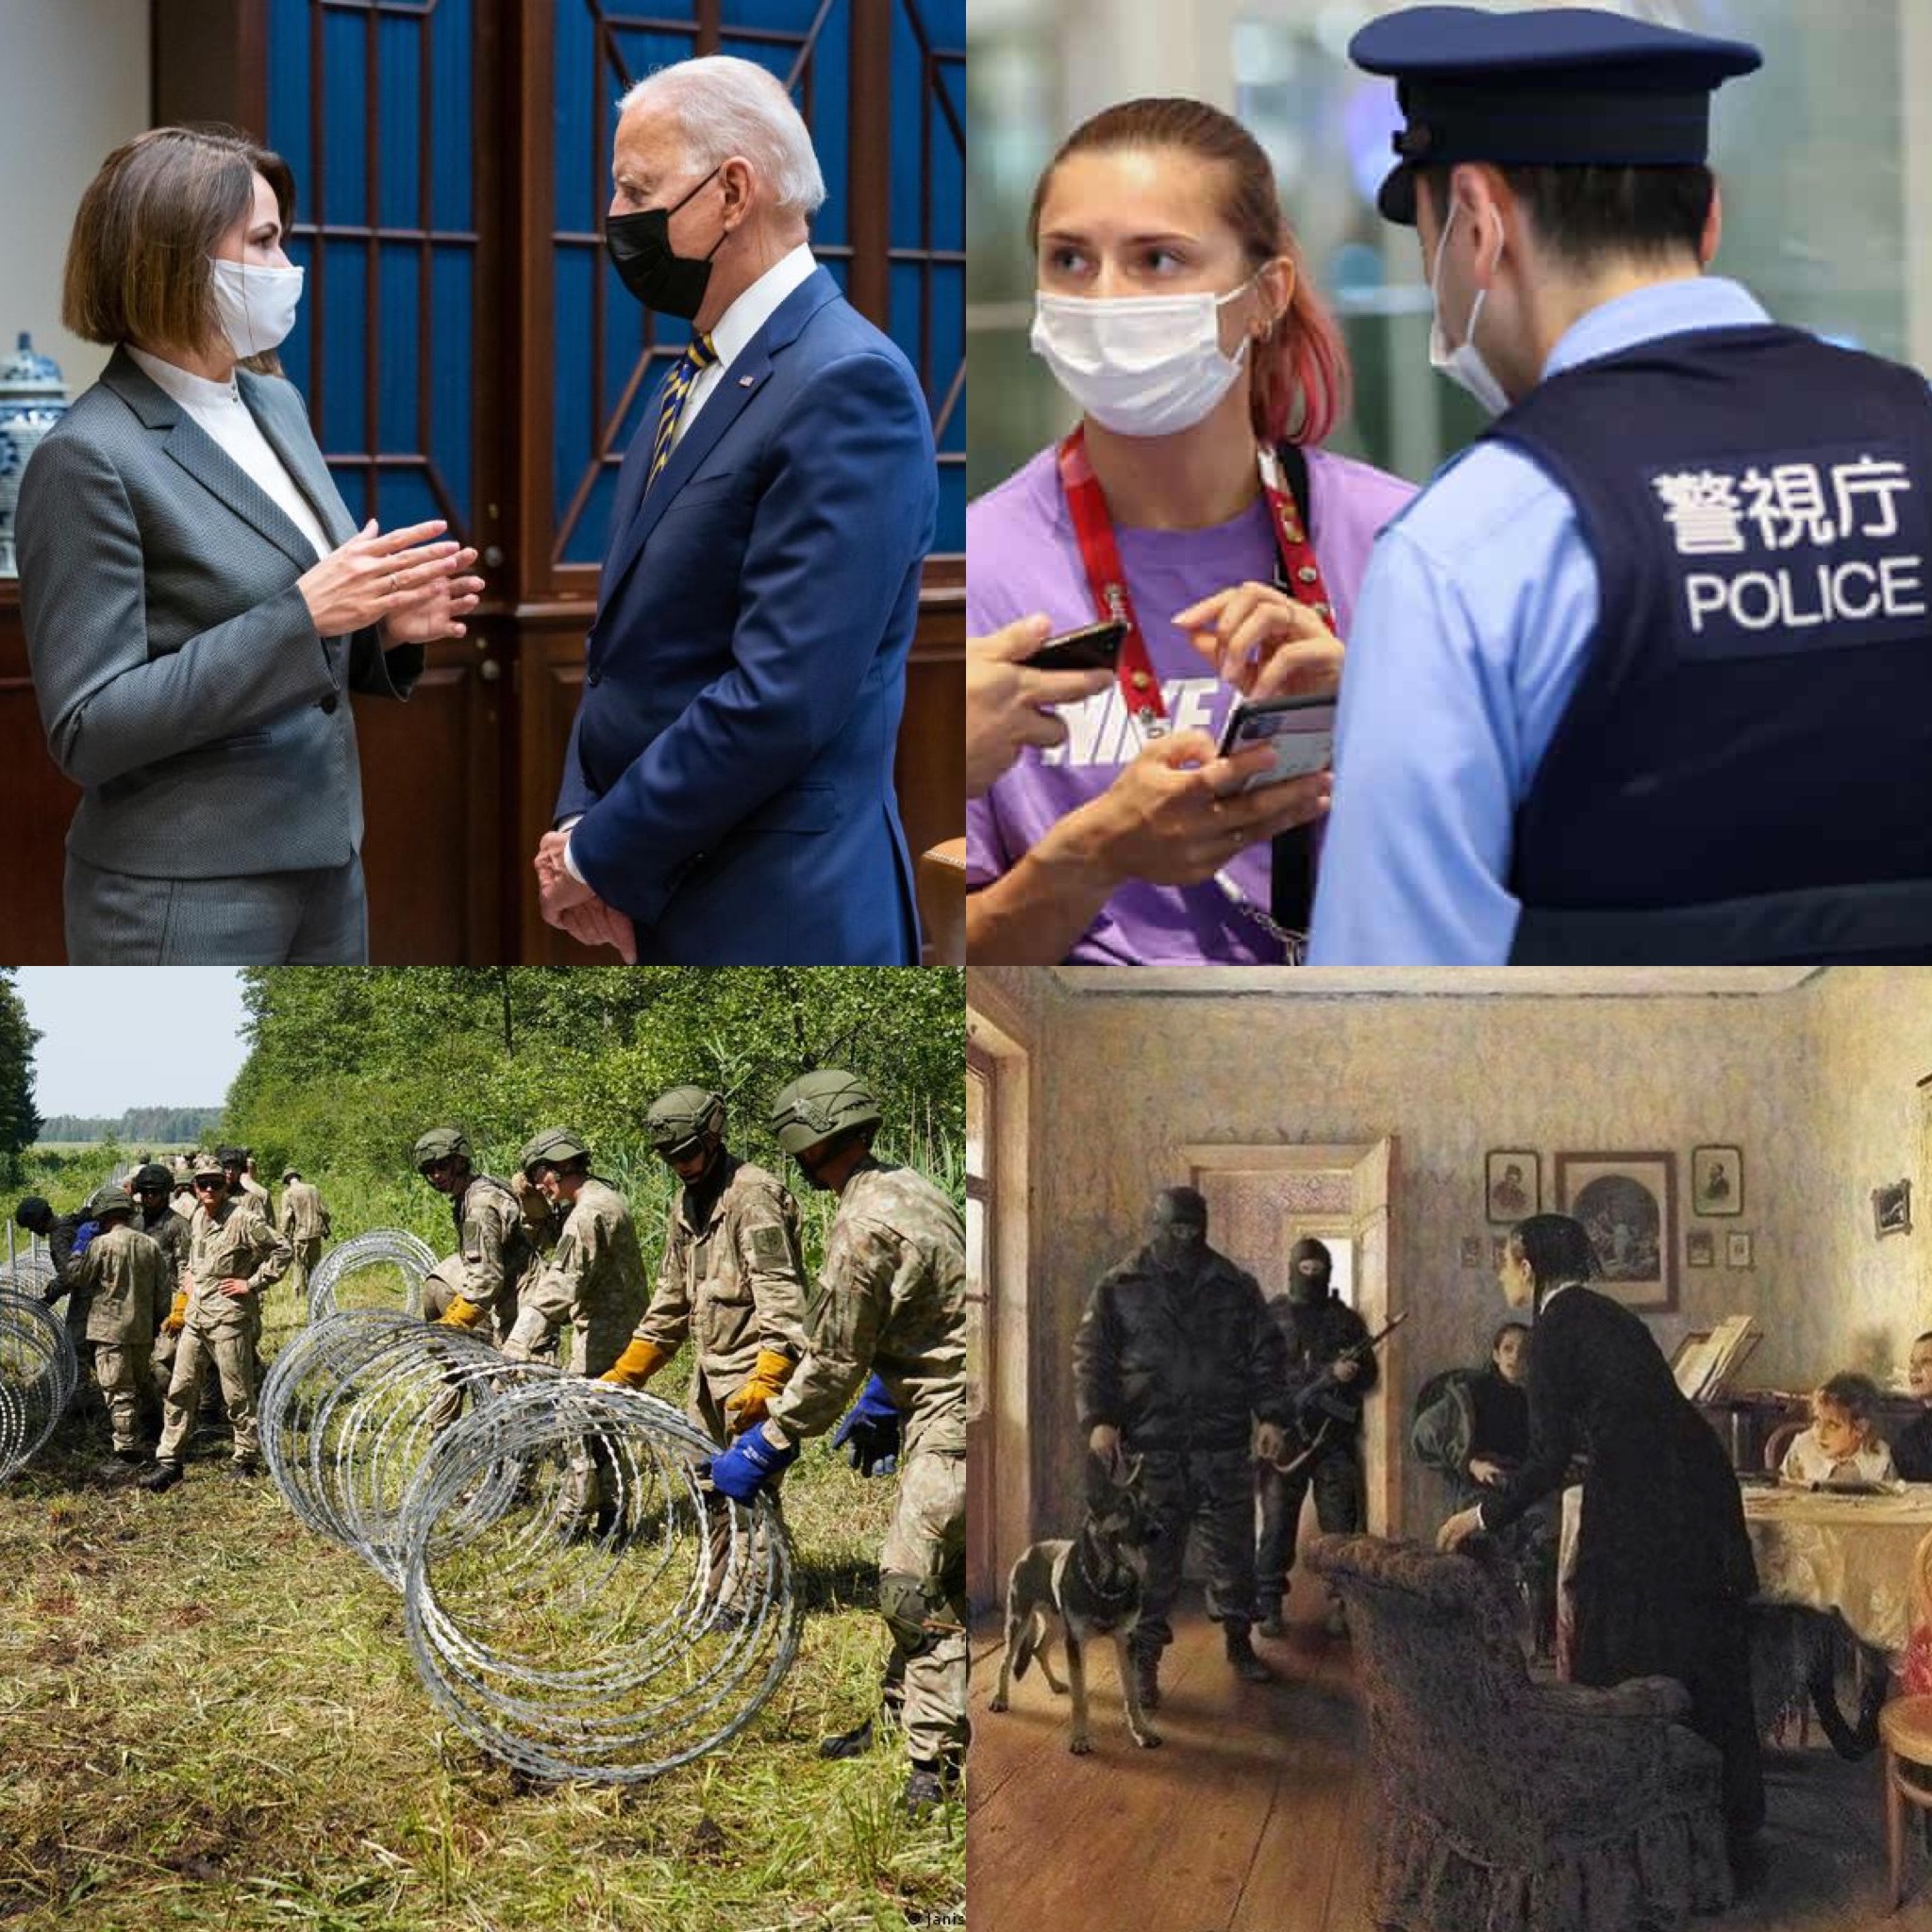 This past week: Sviatlana Tsikhanouskaya meets President Biden, Belarusian Olympic sprinter is being forcibly removed from the Olympics and sent home &amp; much more